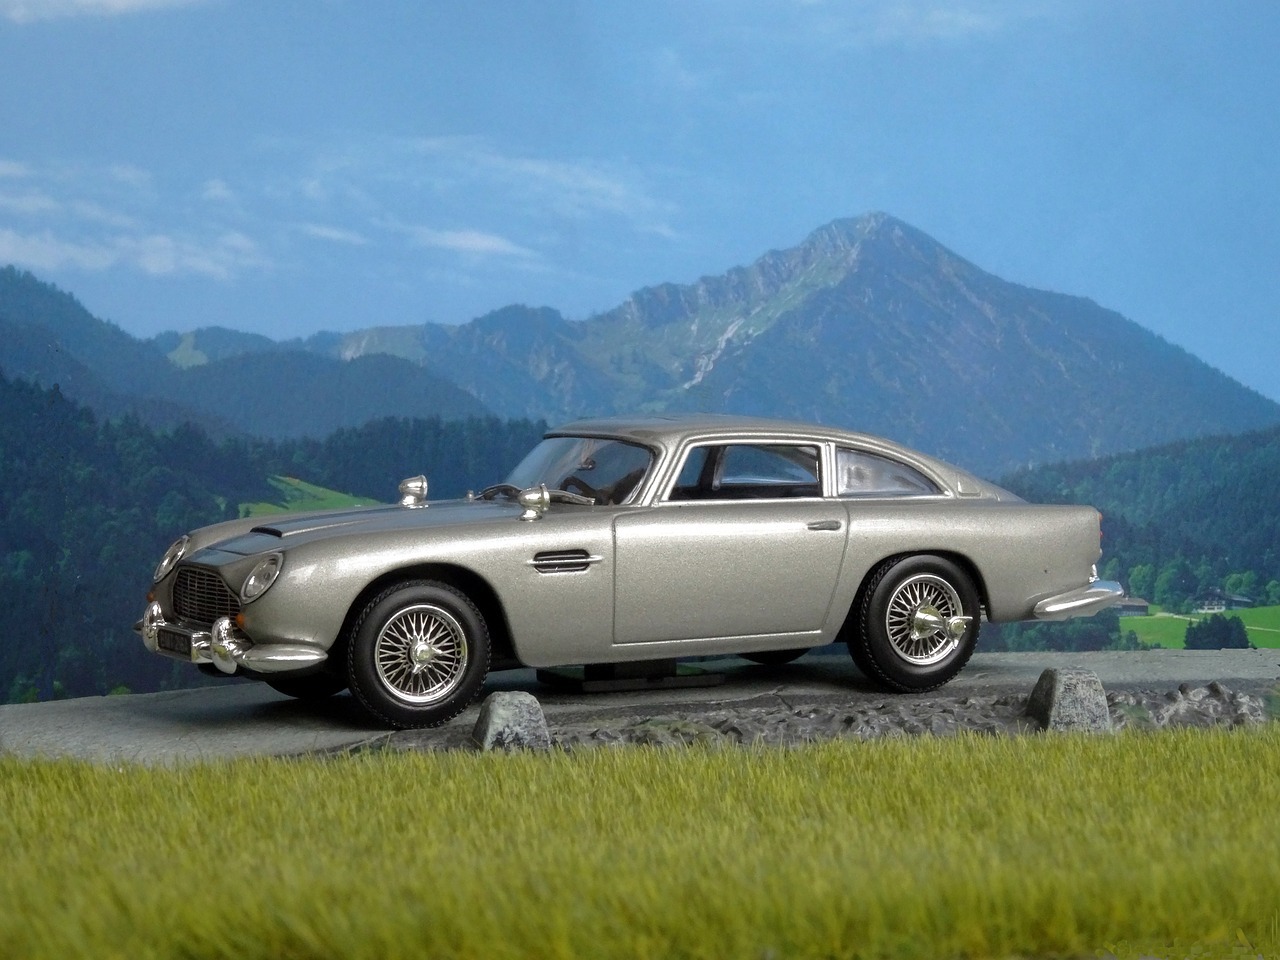 miniature version of the Aston Martin car that appeared in Goldfinger